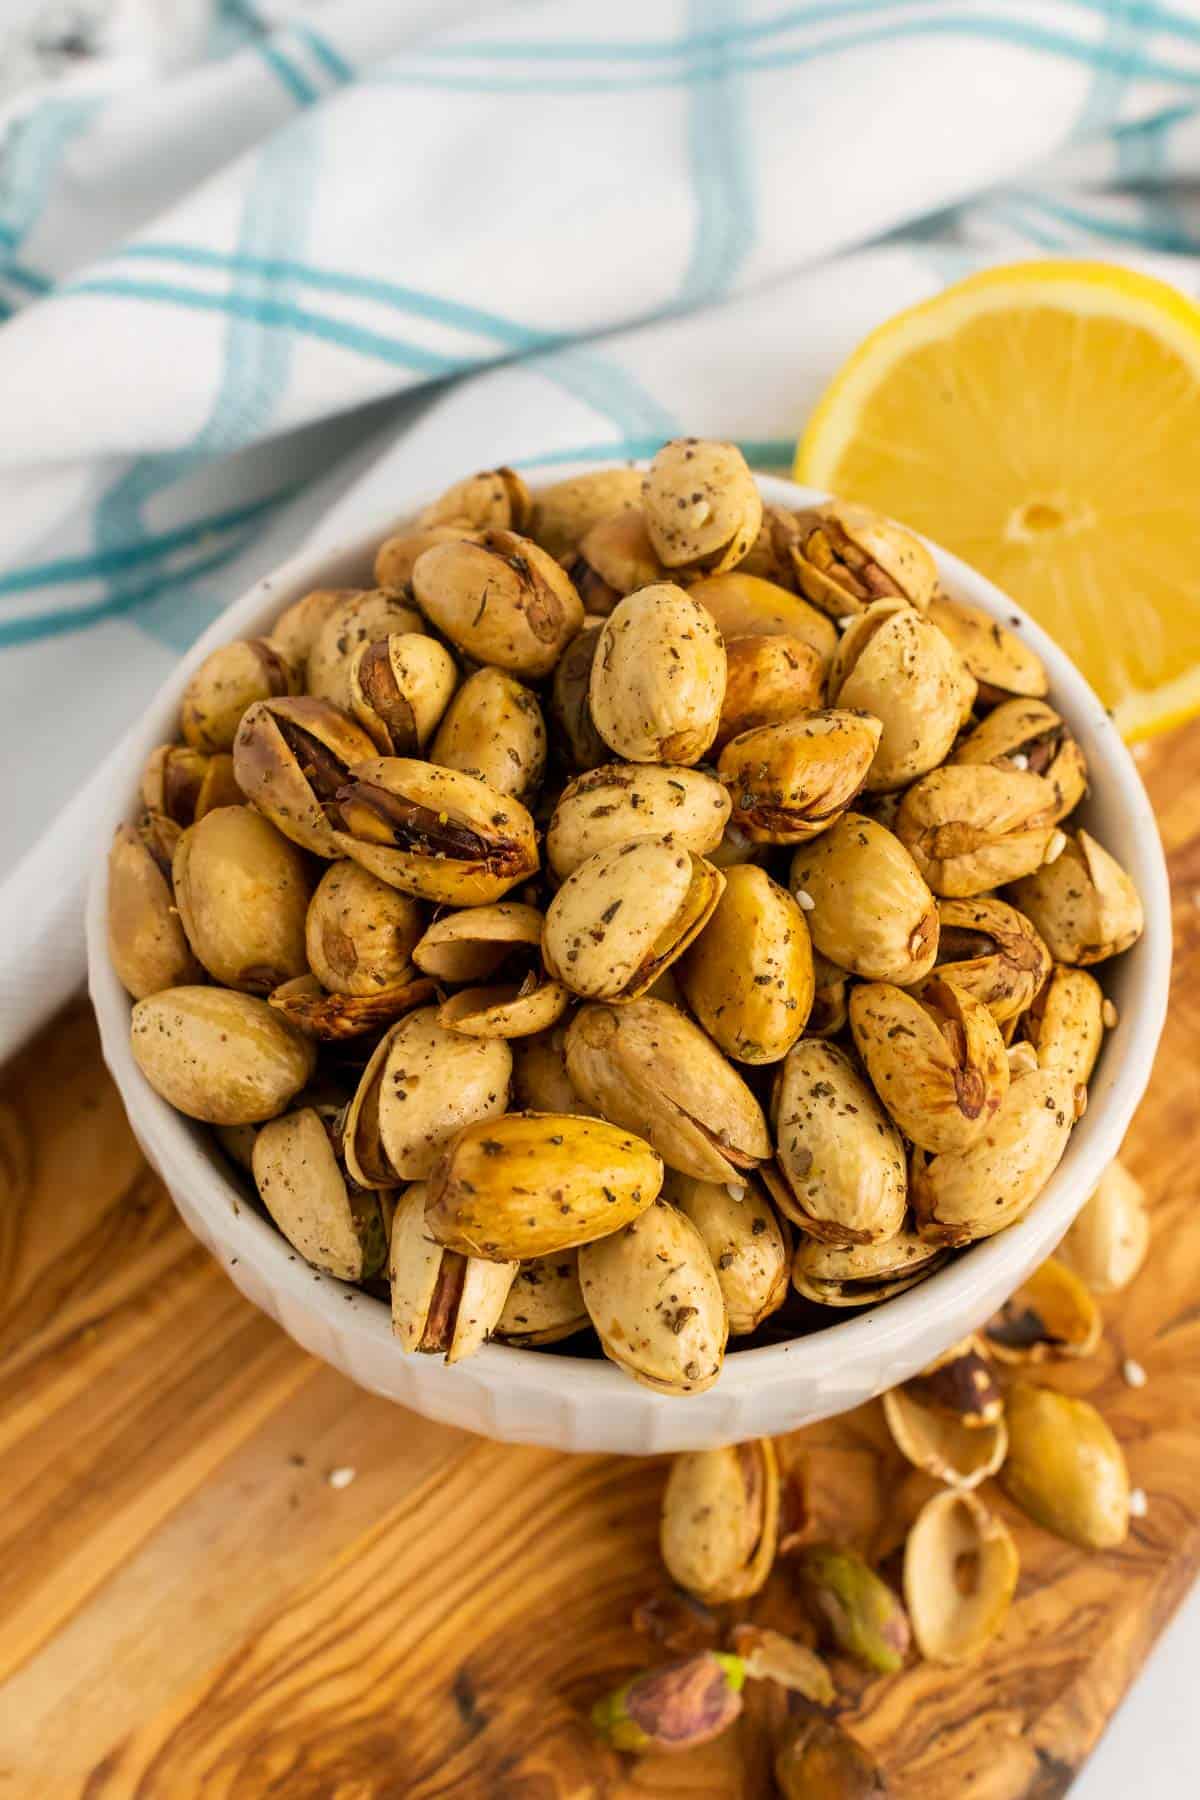 Bowl of pistachios on table with half a lemon